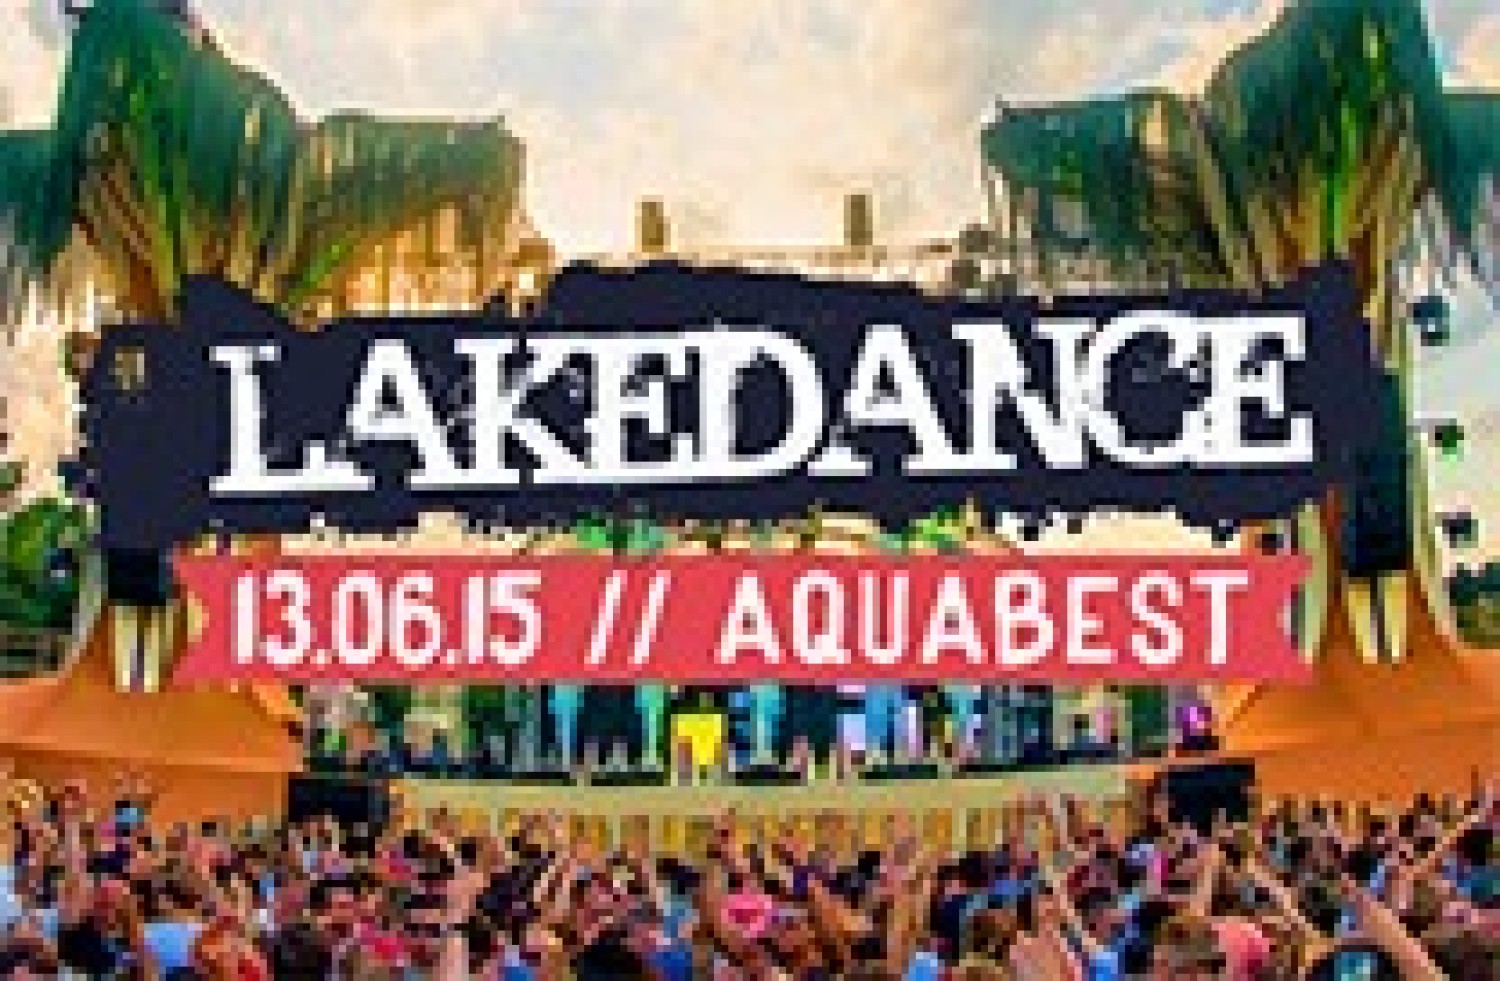 Party report: Lakedance, Best (13-06-2015)